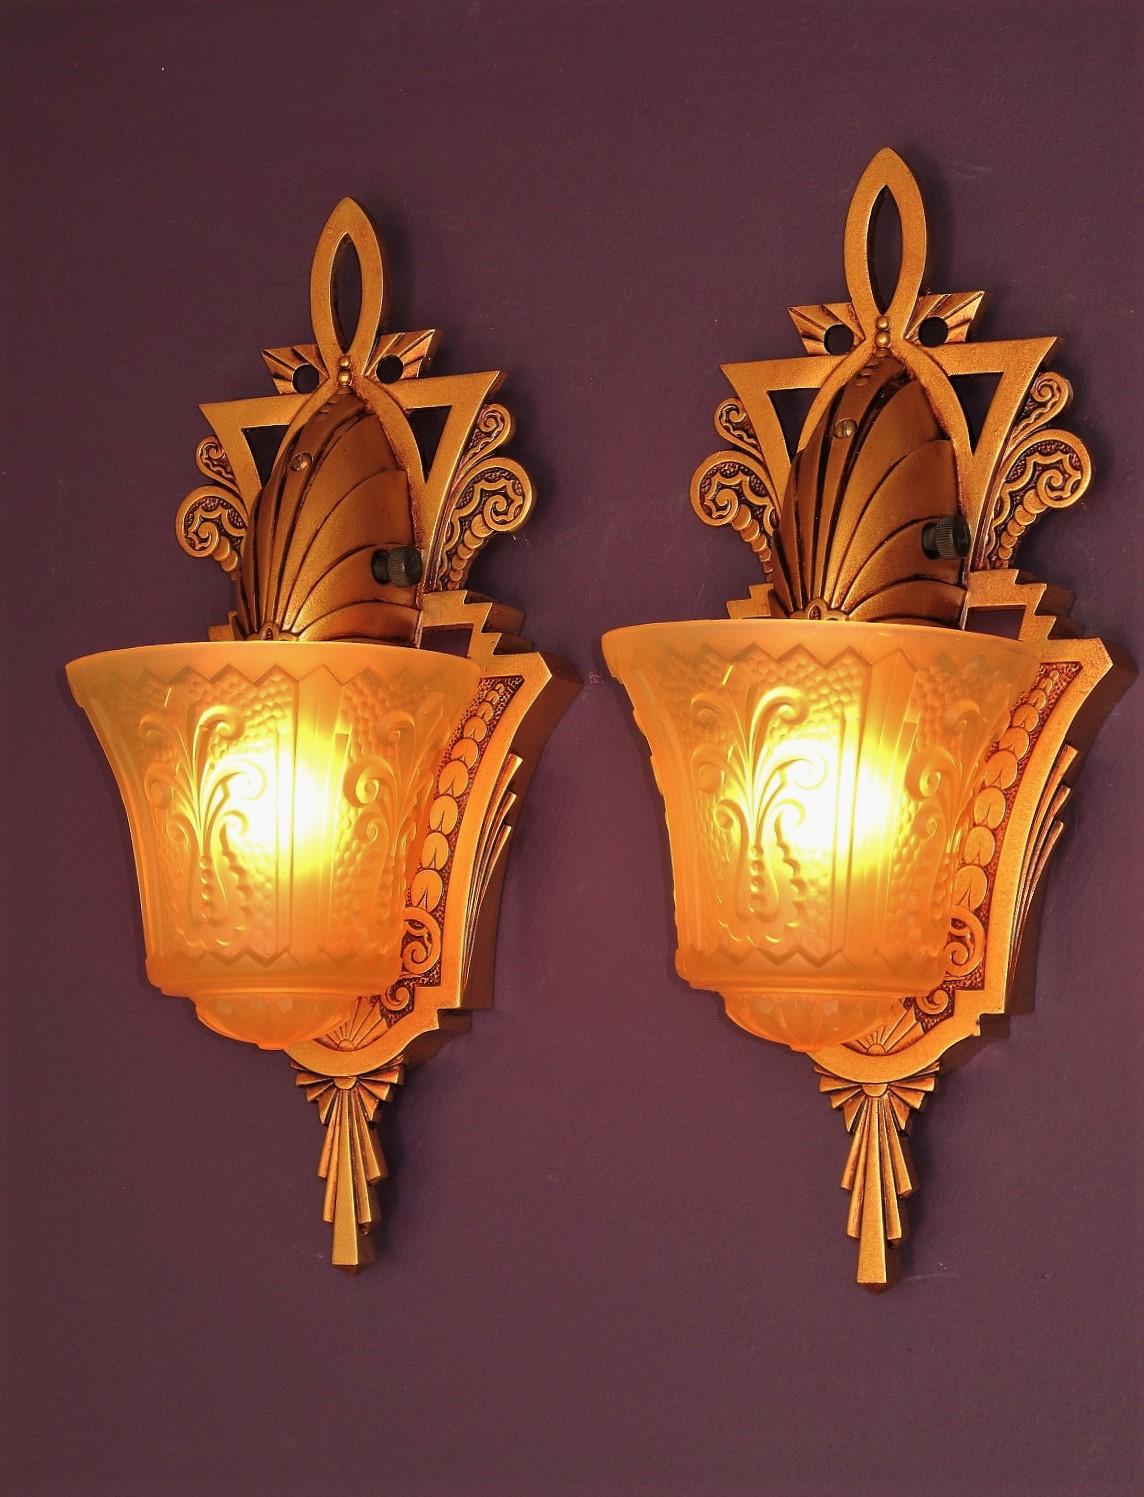 Several pair available, priced per pair.
Harken back to time when Art Deco design was unabashedly bold, striking and beautiful. Patented in 1934 from the world renown fixture designers Beardslee of Chicago.
Refinished in a deep warm sunset golden